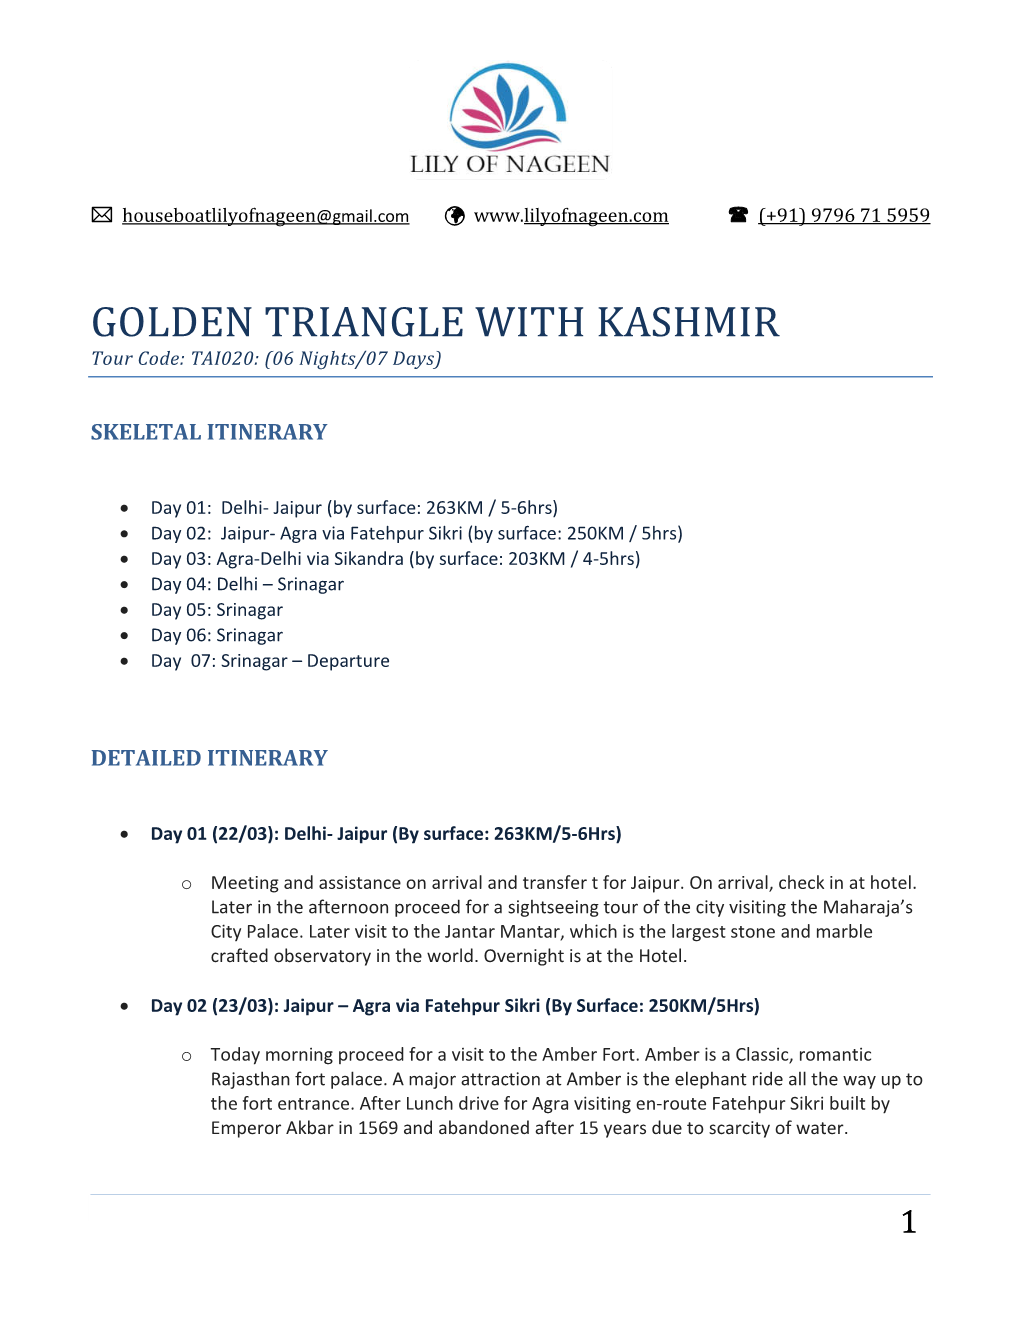 GOLDEN TRIANGLE with KASHMIR Tour Code: TAI020: (06 Nights/07 Days)